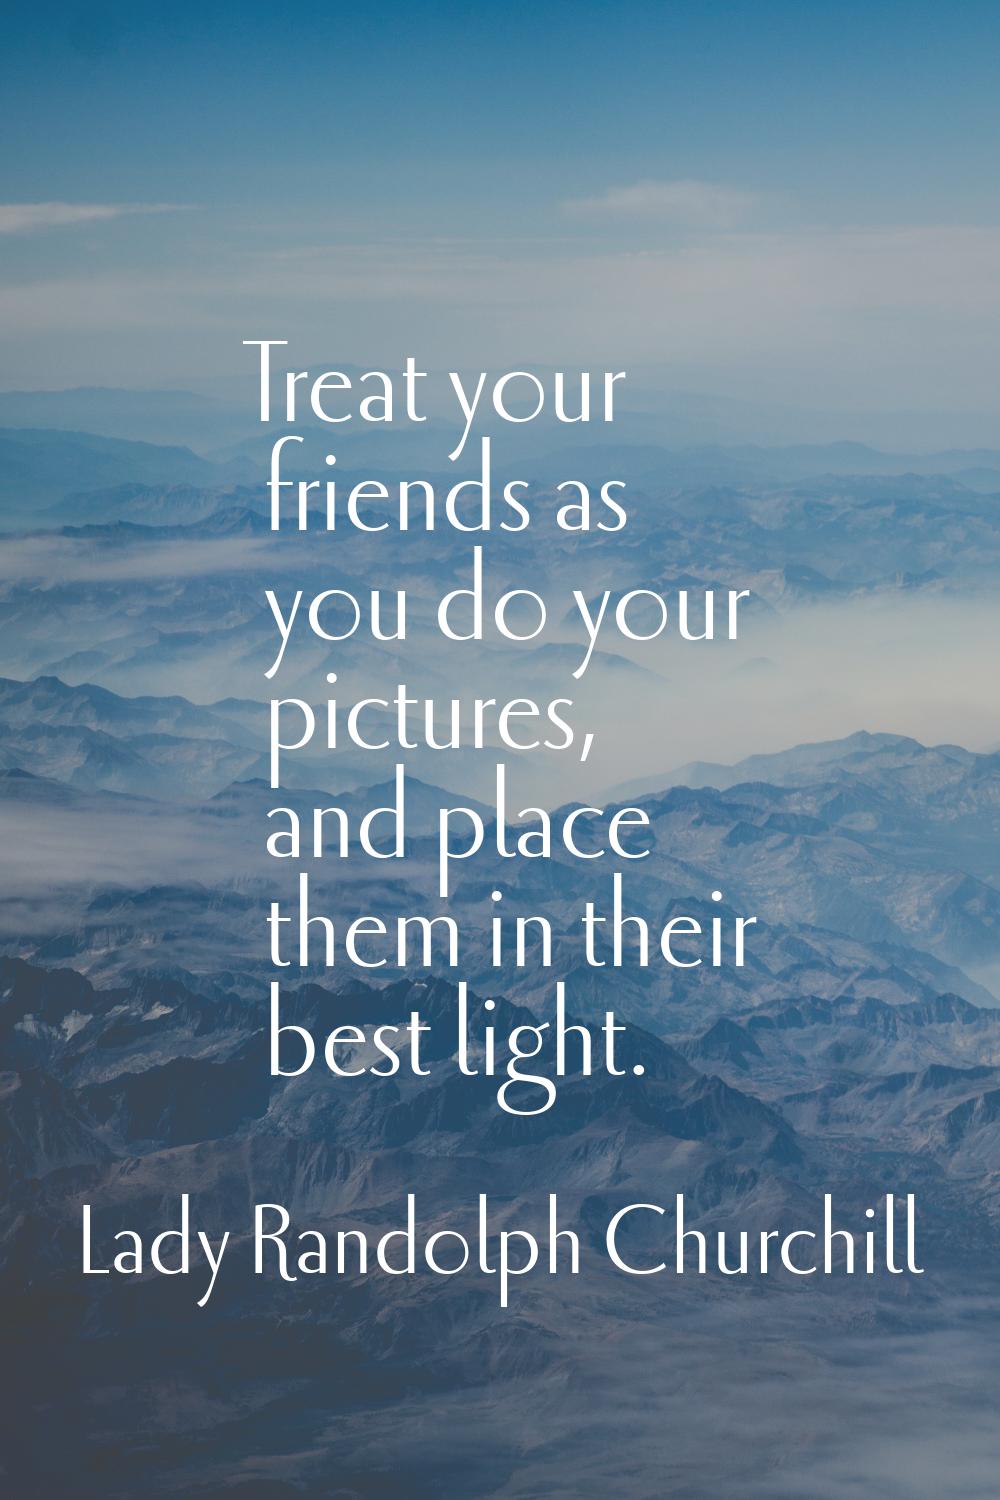 Treat your friends as you do your pictures, and place them in their best light.